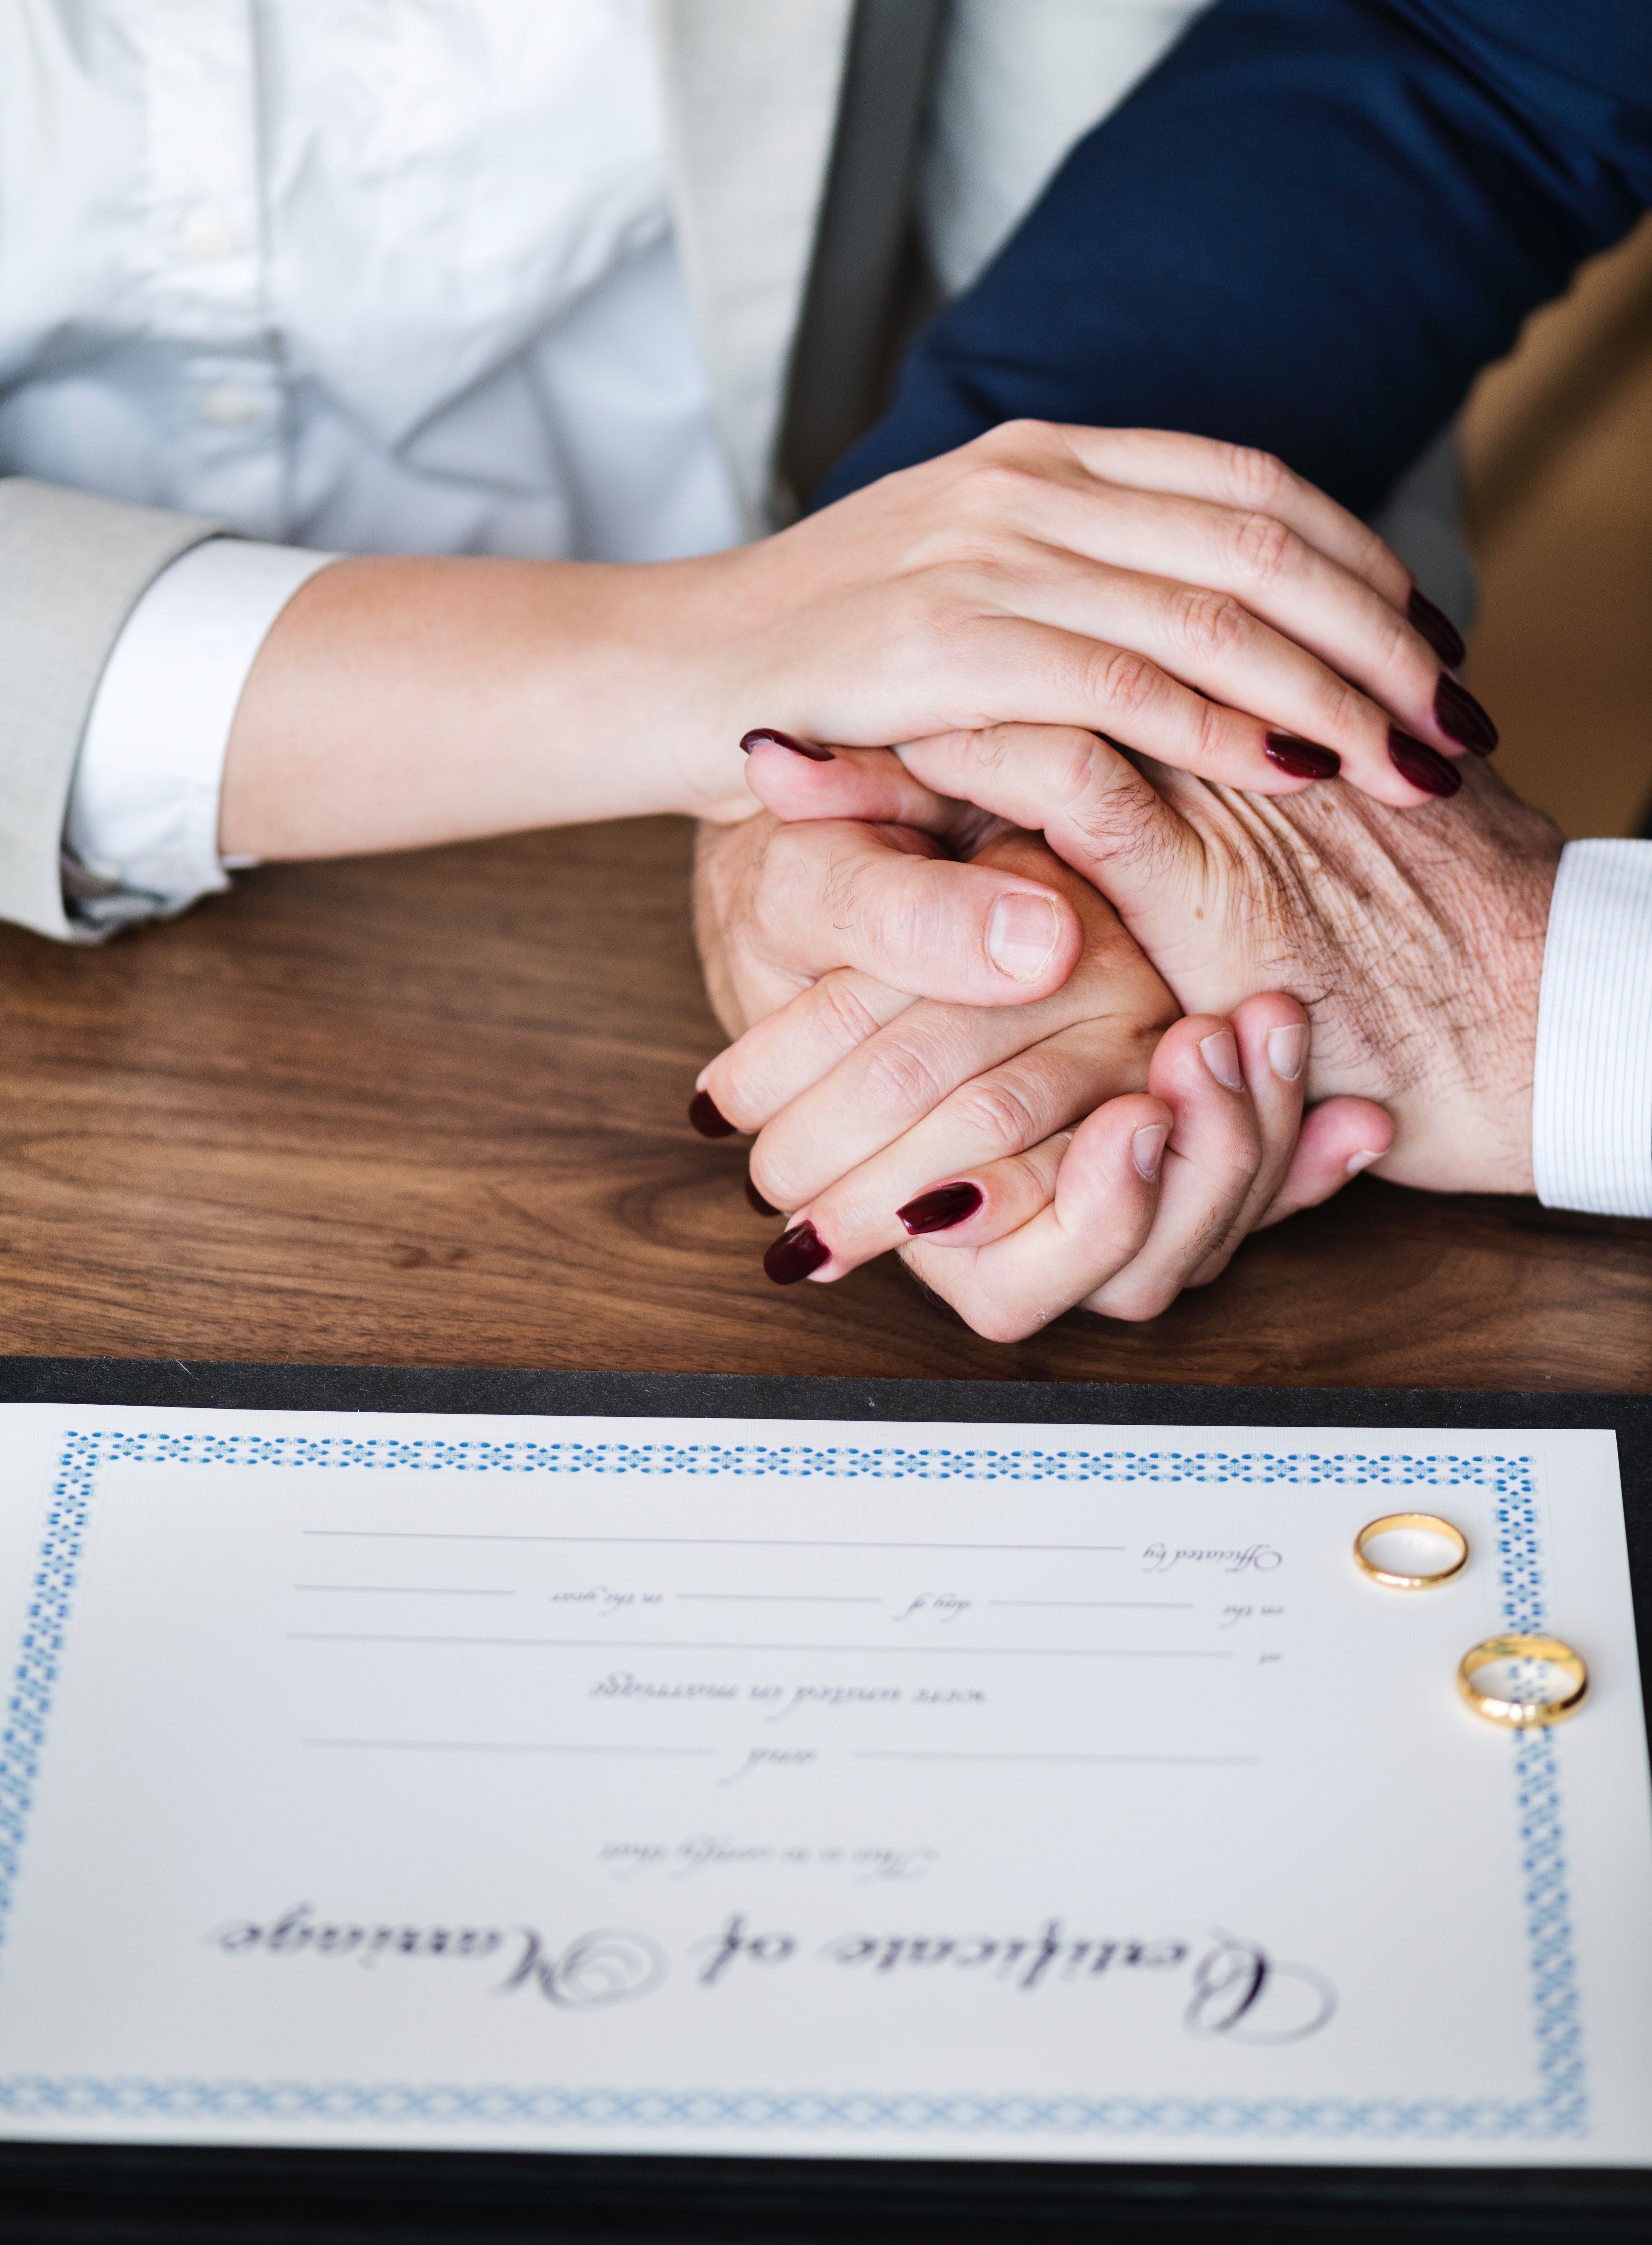 Man and Woman Holding Hands on Brown Wooden Table, Adults, Marriage Certificate, Wife, Wedding rings, HQ Photo